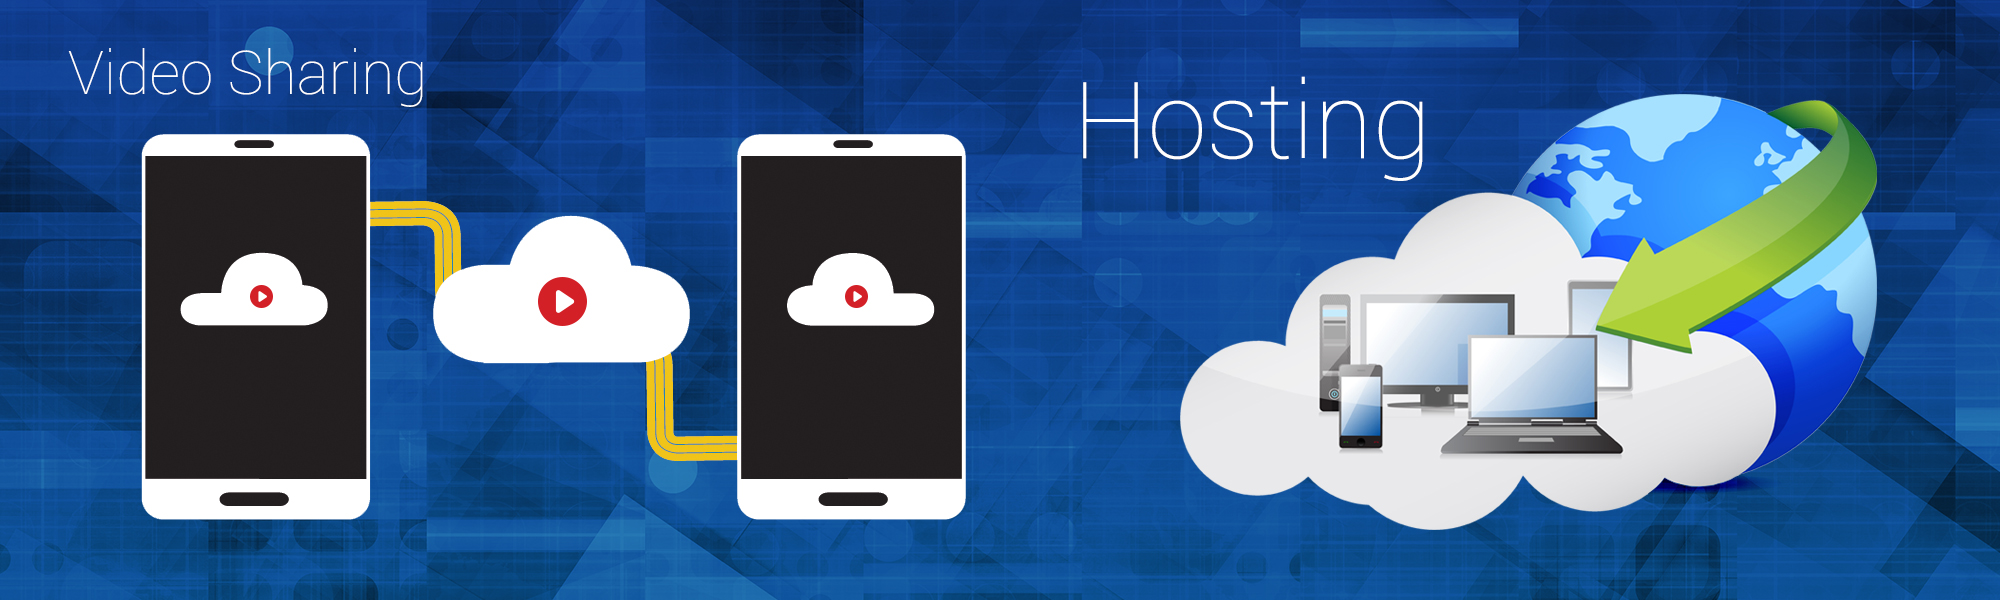 Video-Sharing-Hosting-A